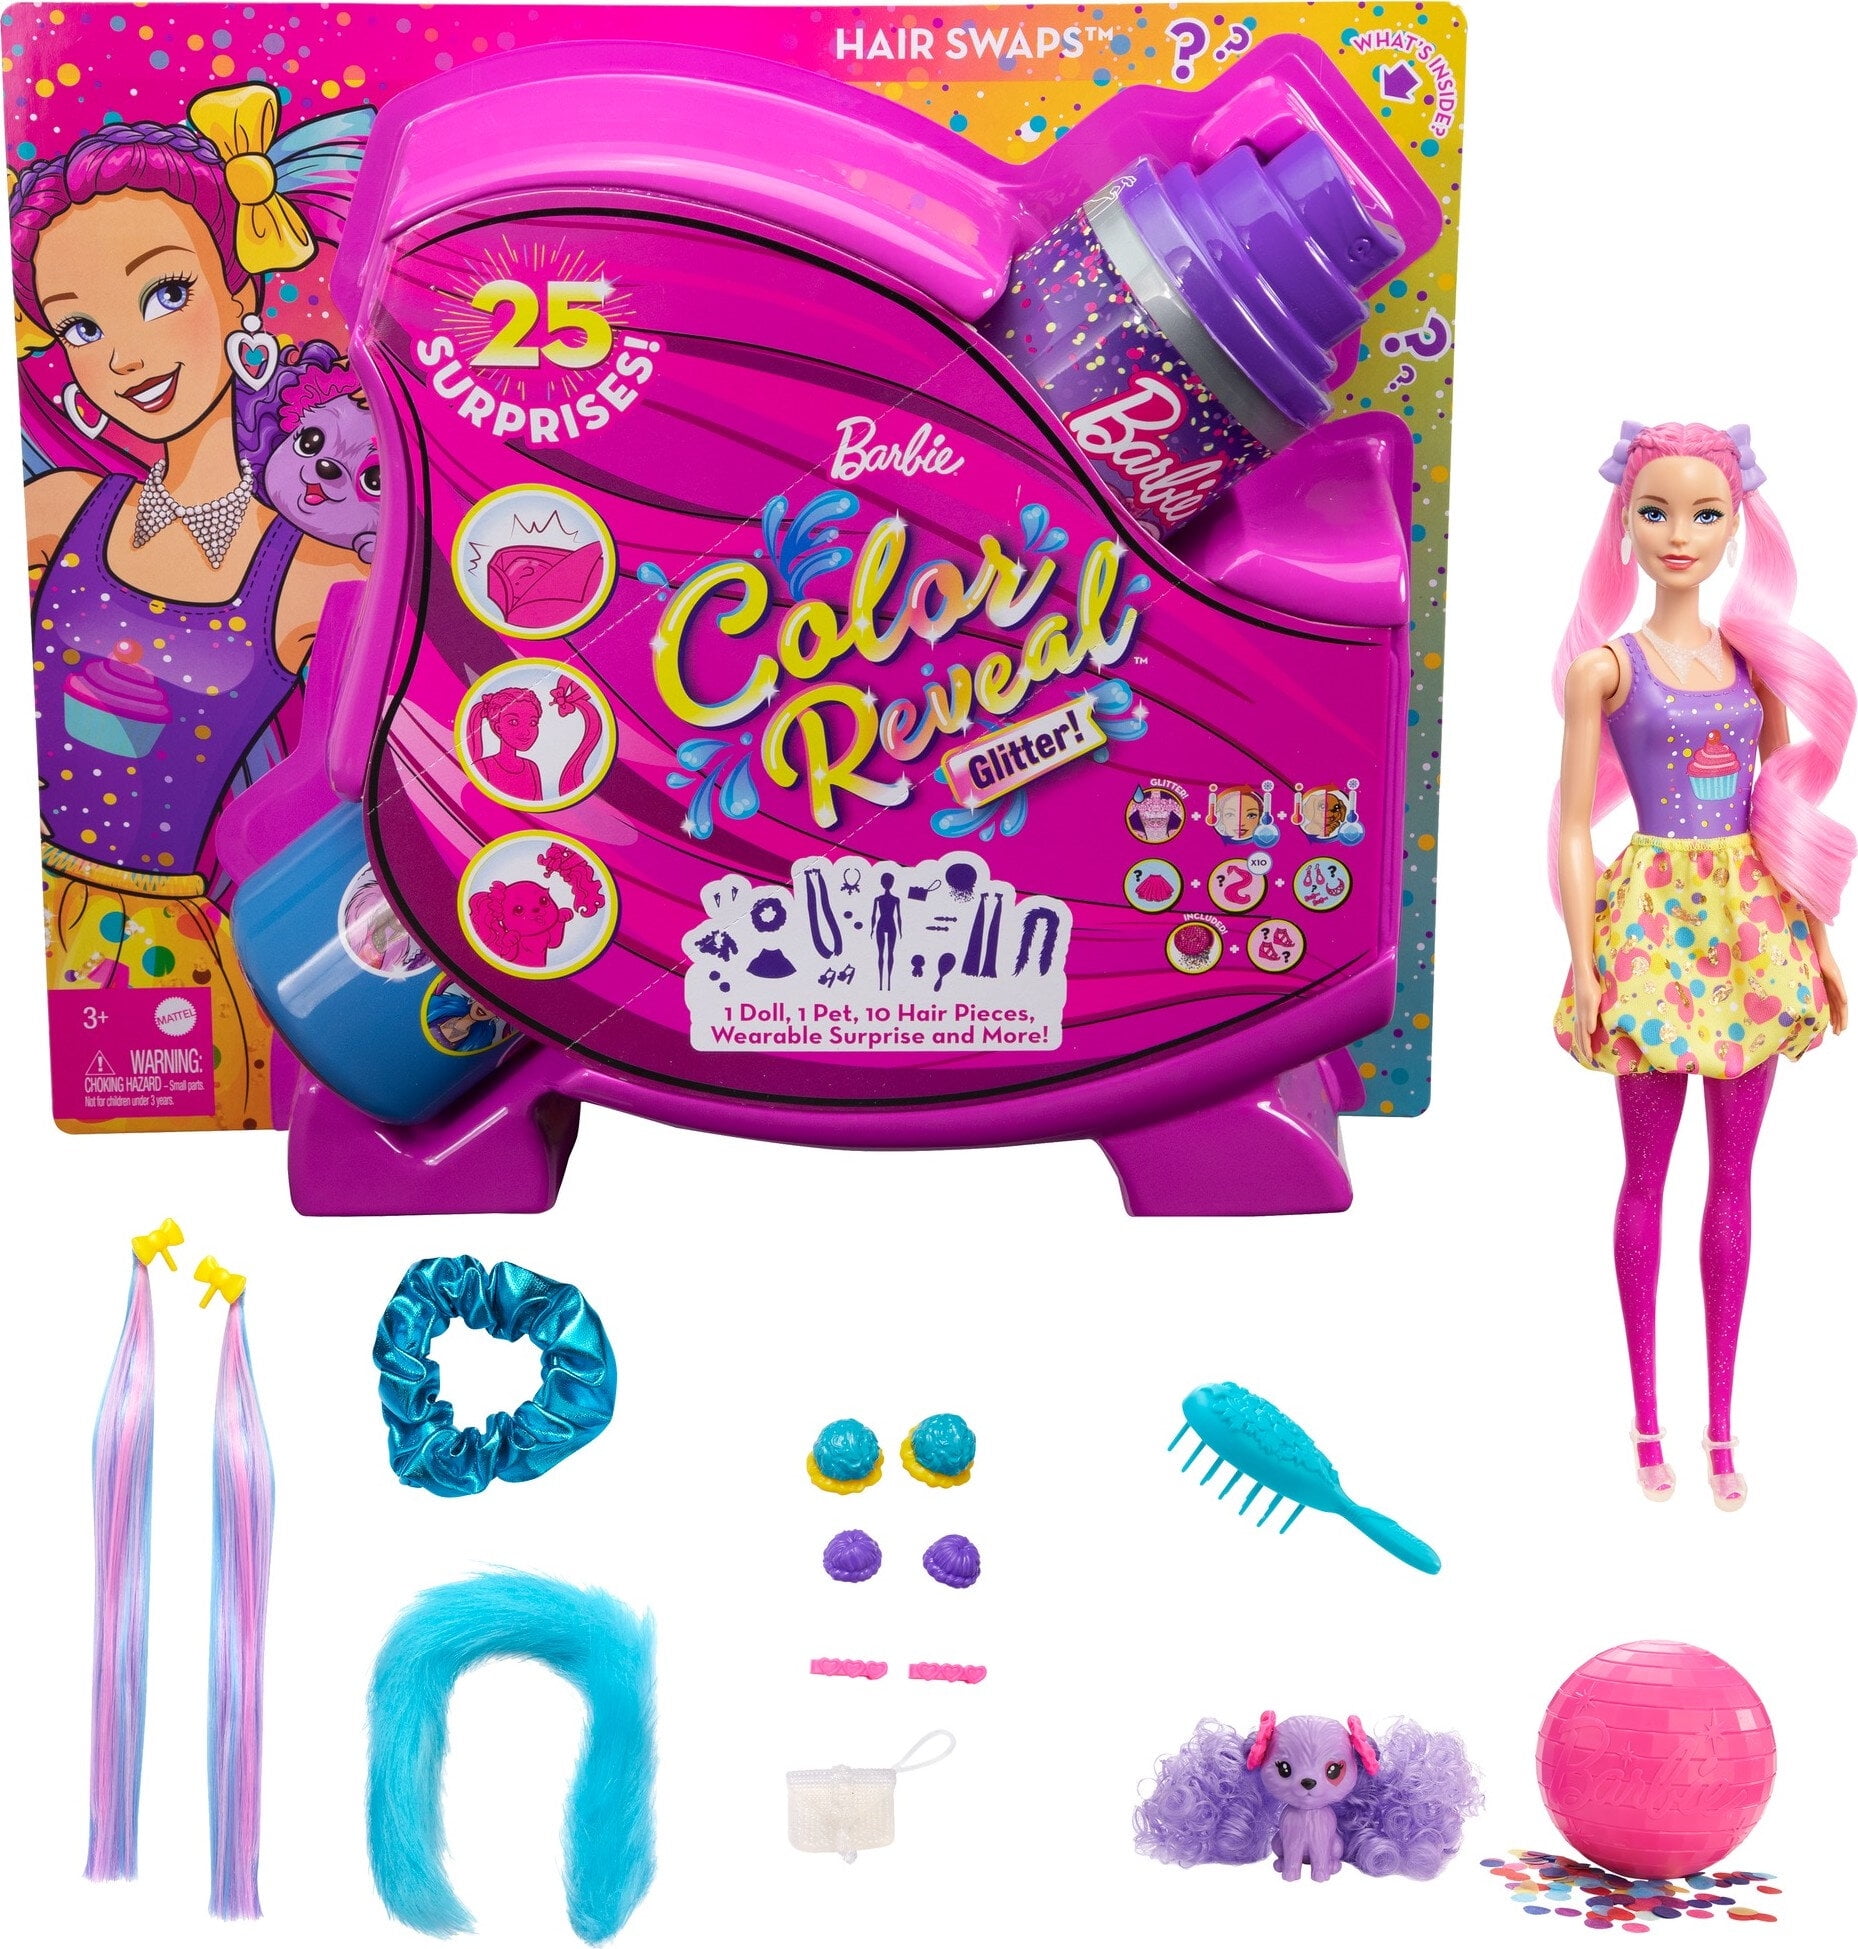 Barbie Color Reveal Glitter Hair Swaps Doll Glittery Pink 25 Hairstyling Party Themed Surprises Including 10 Plug in Pieces Gift Kids 3 Years Old Up 9c544457 dbef 41da 9810 945edb9e8cf2.200e6691744bd9ad53d318ee0f64ed26